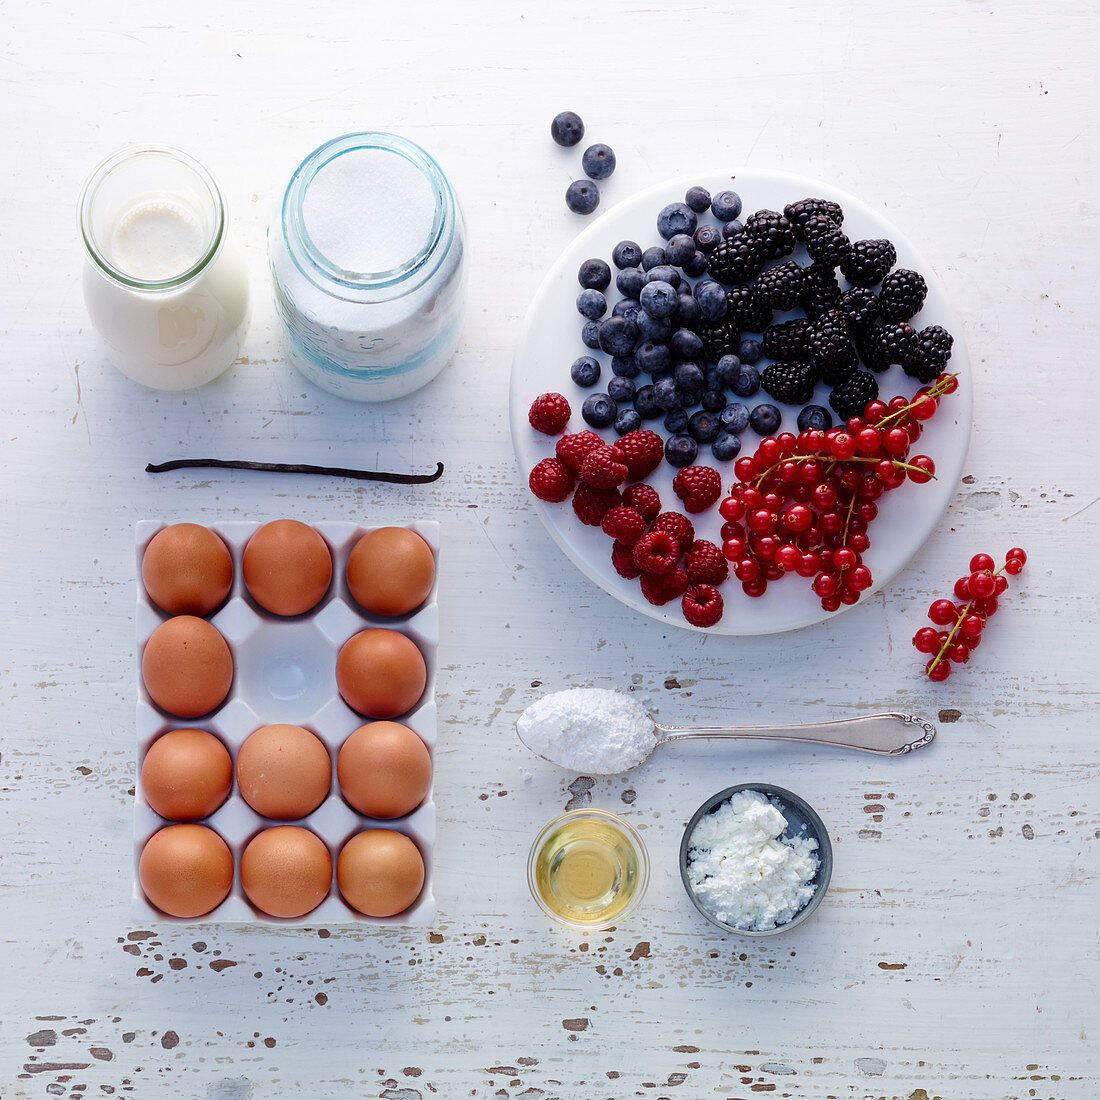 Ingredients for pavlova with berries